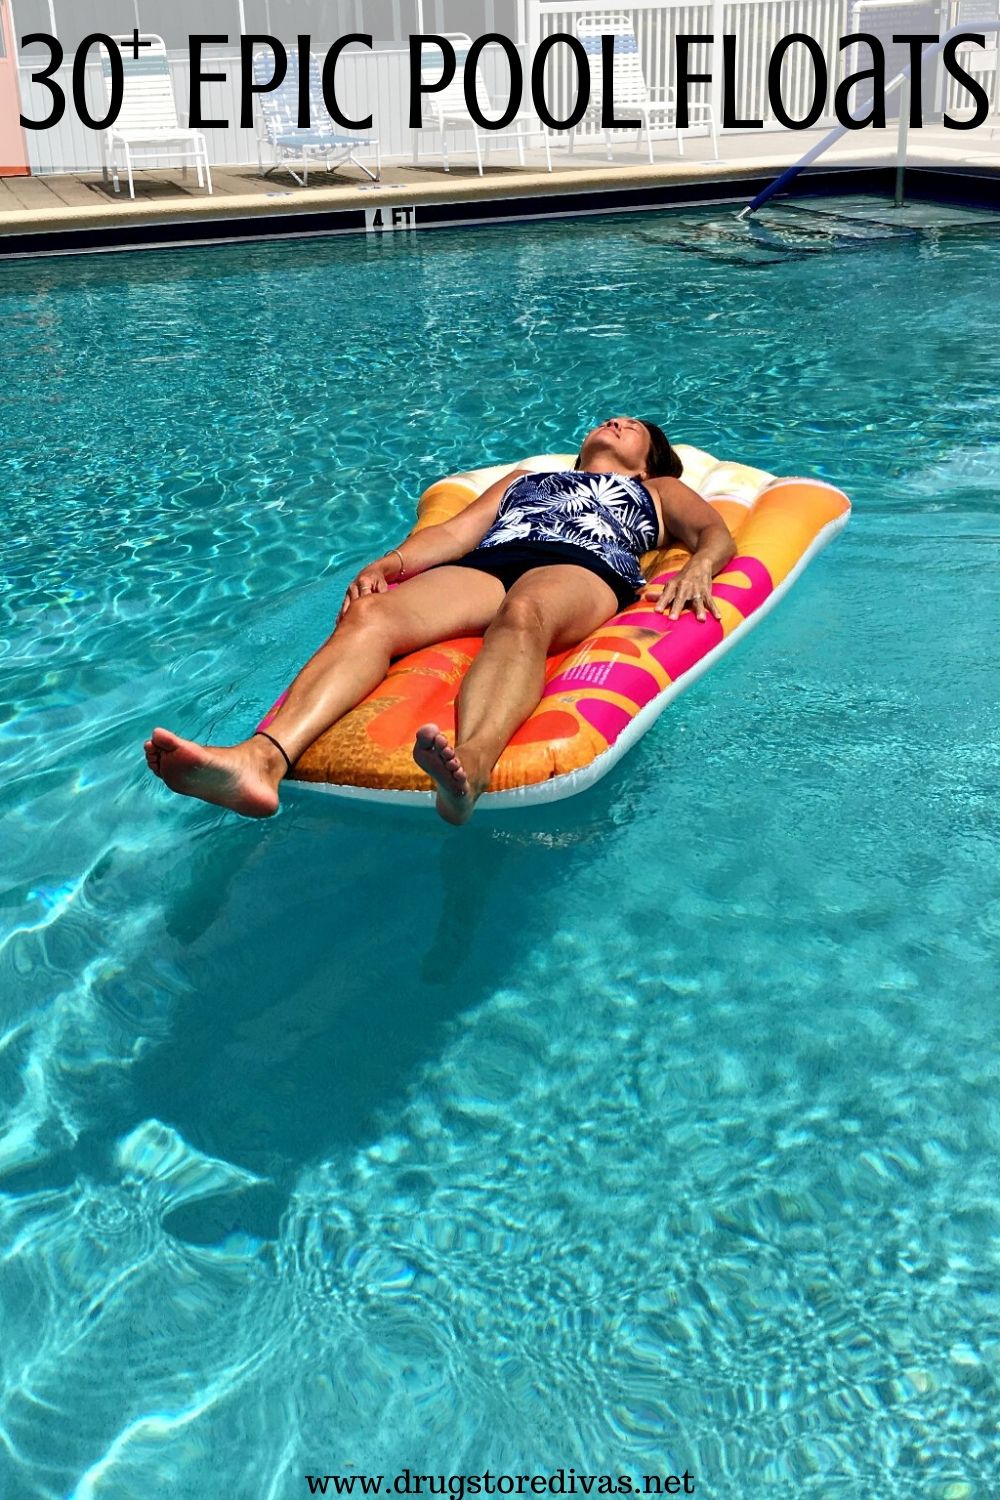 A woman floating on a pool float with the words "30+ Epic Pool Floats" digitally written above her.